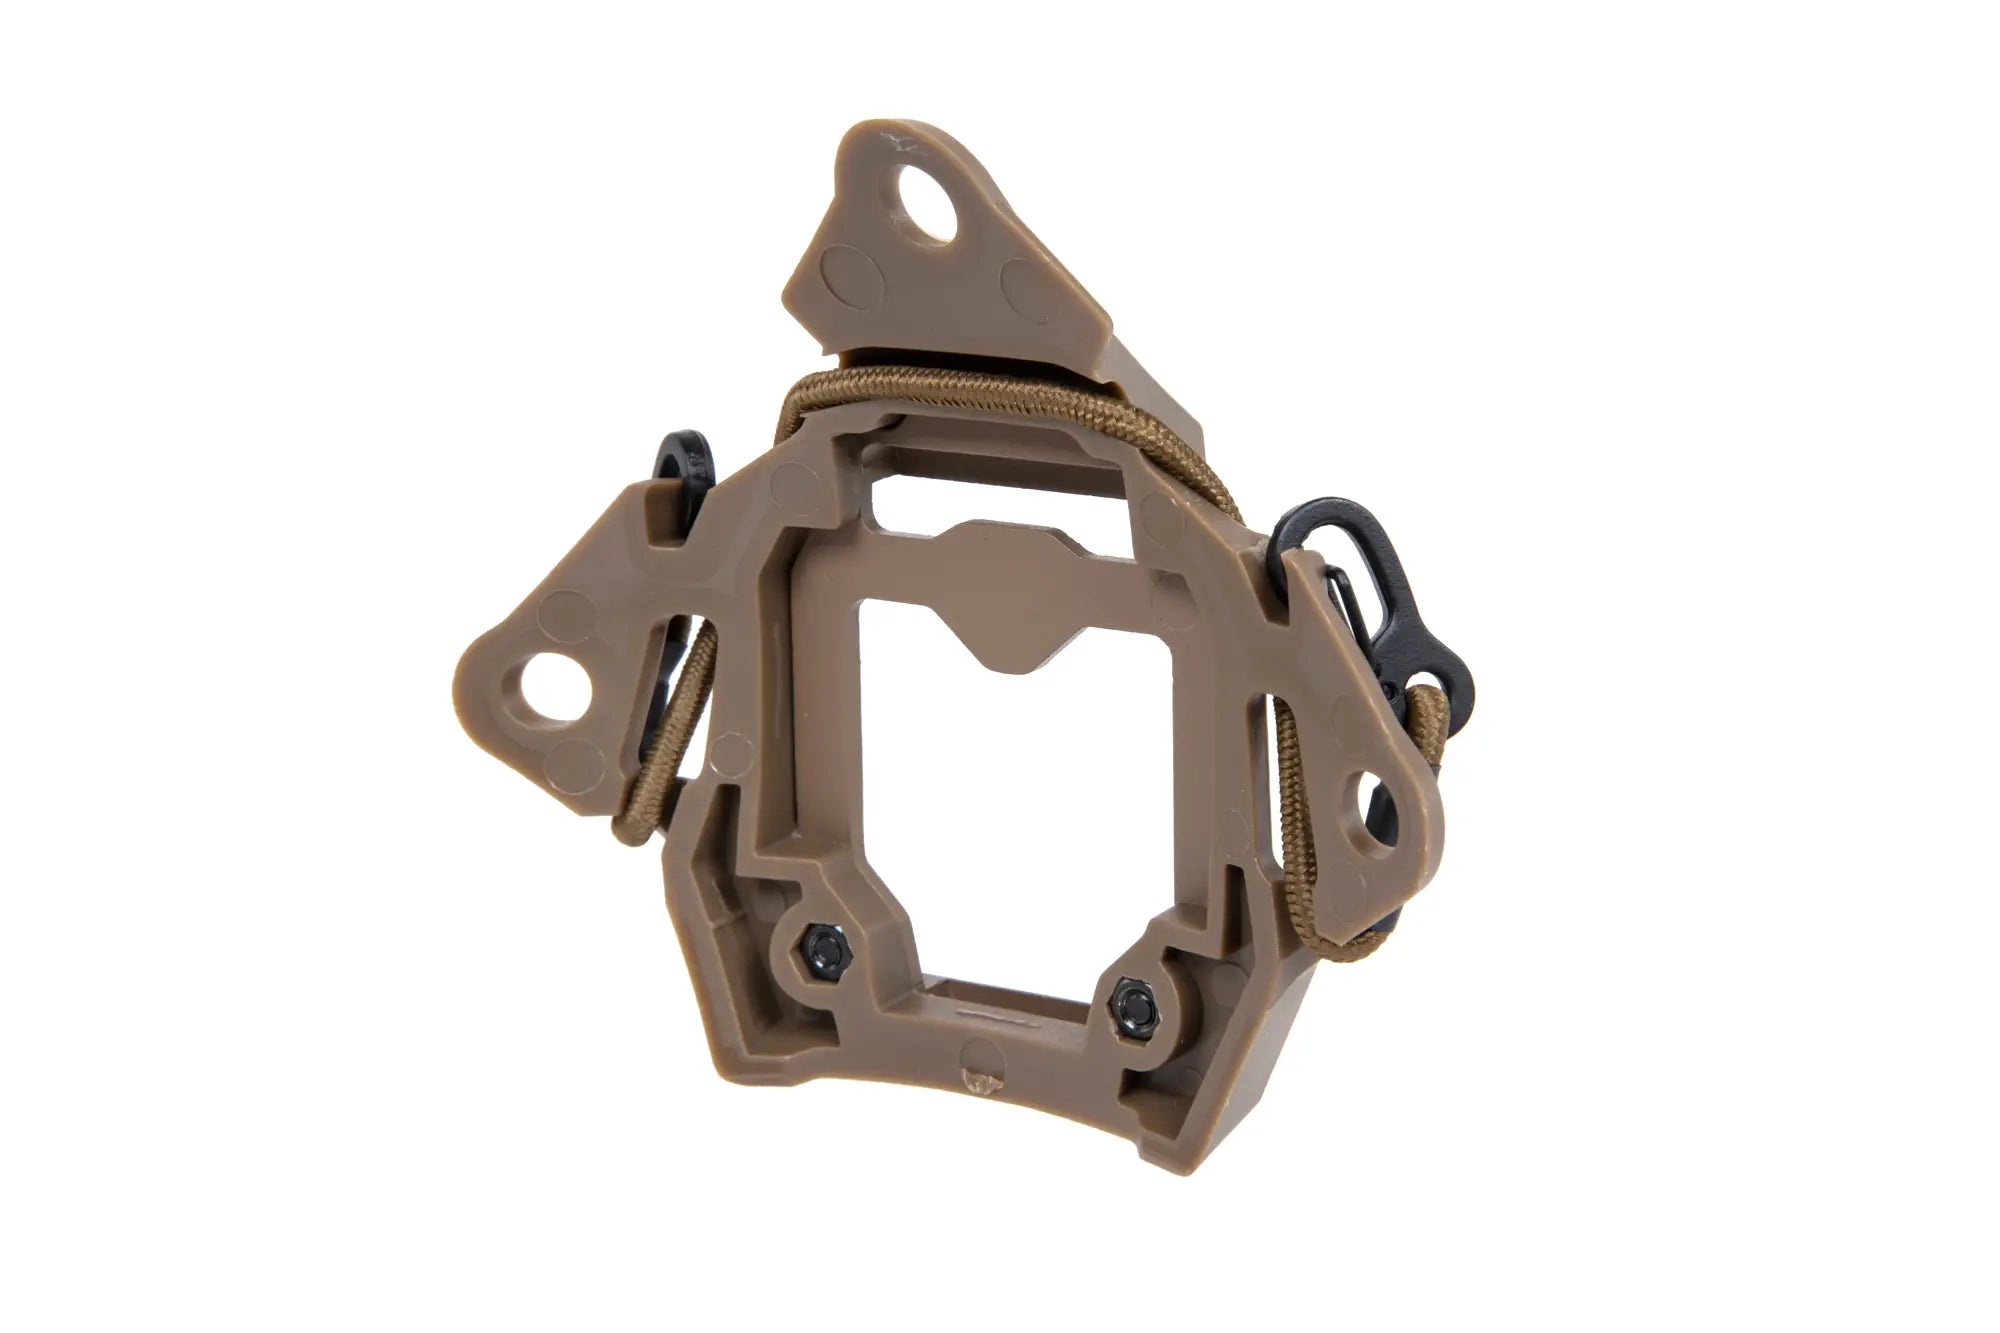 Mounting the Wosport FAST High Cut Tan night vision device-1